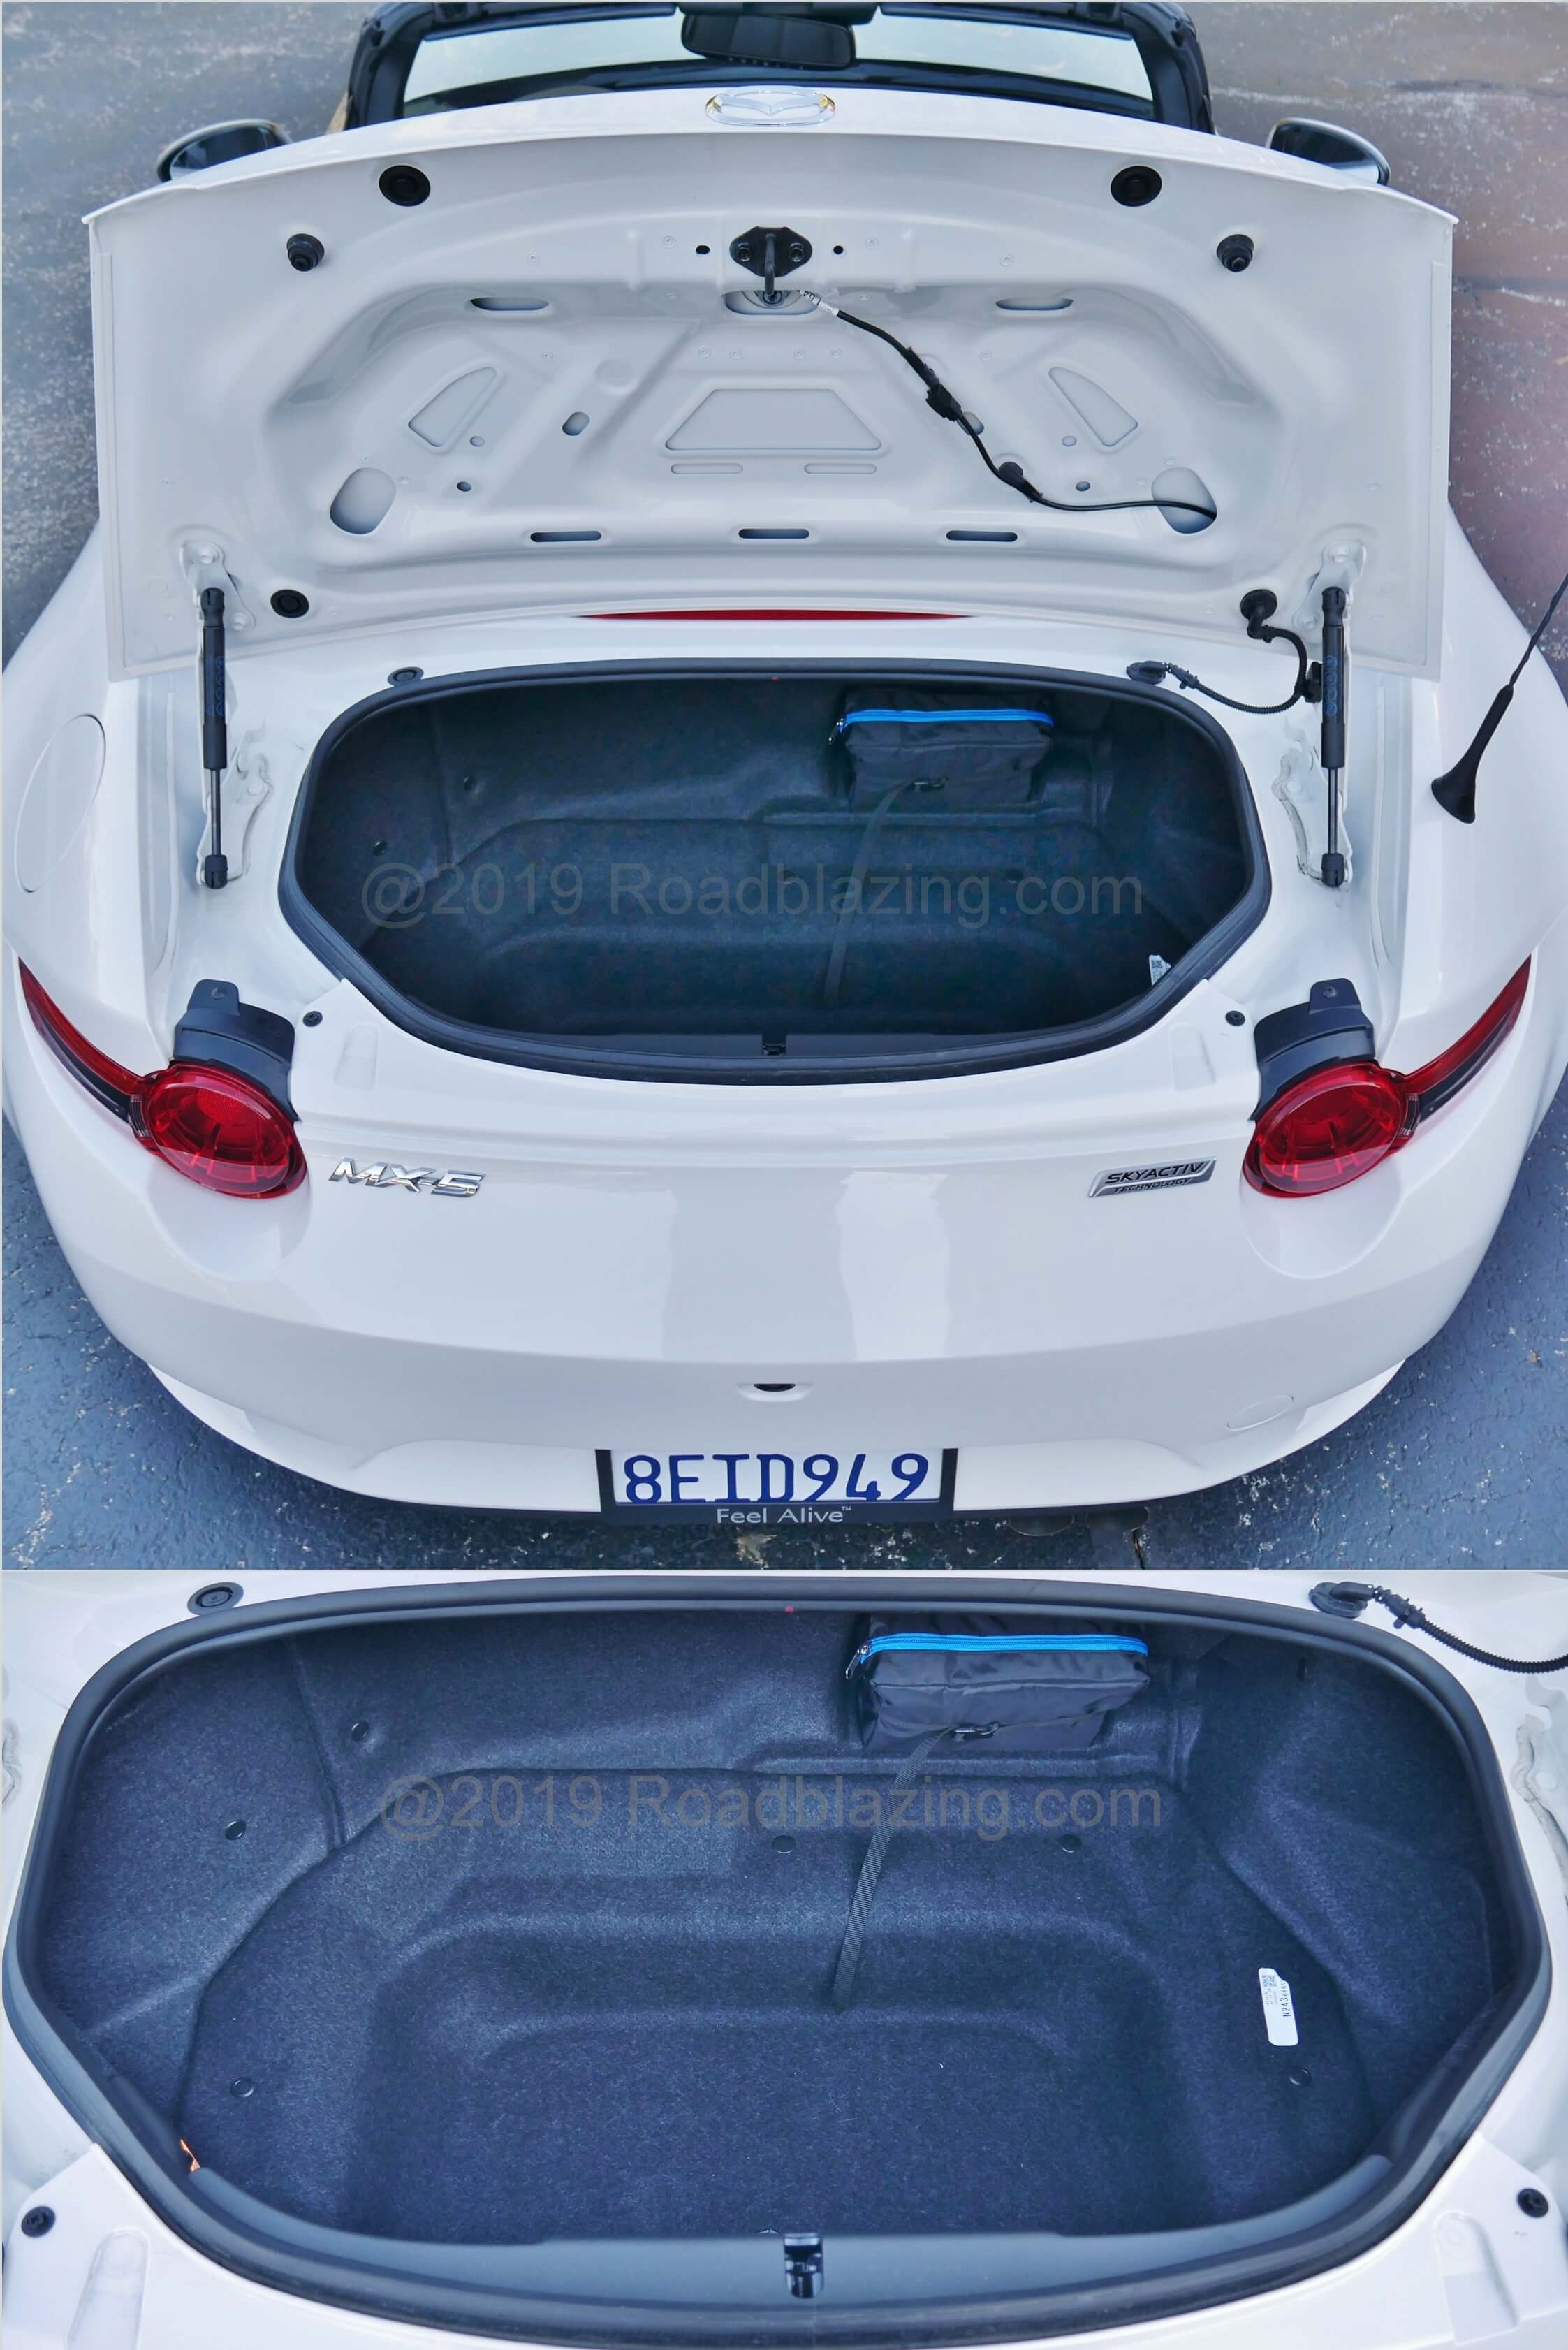 2019 Mazda MX-5 Grand Touring: Trunk cargo space is sparser than in previous NC generation. Think one 22" roll-aboard carry-on and [MAYBE] 2 personal bags.